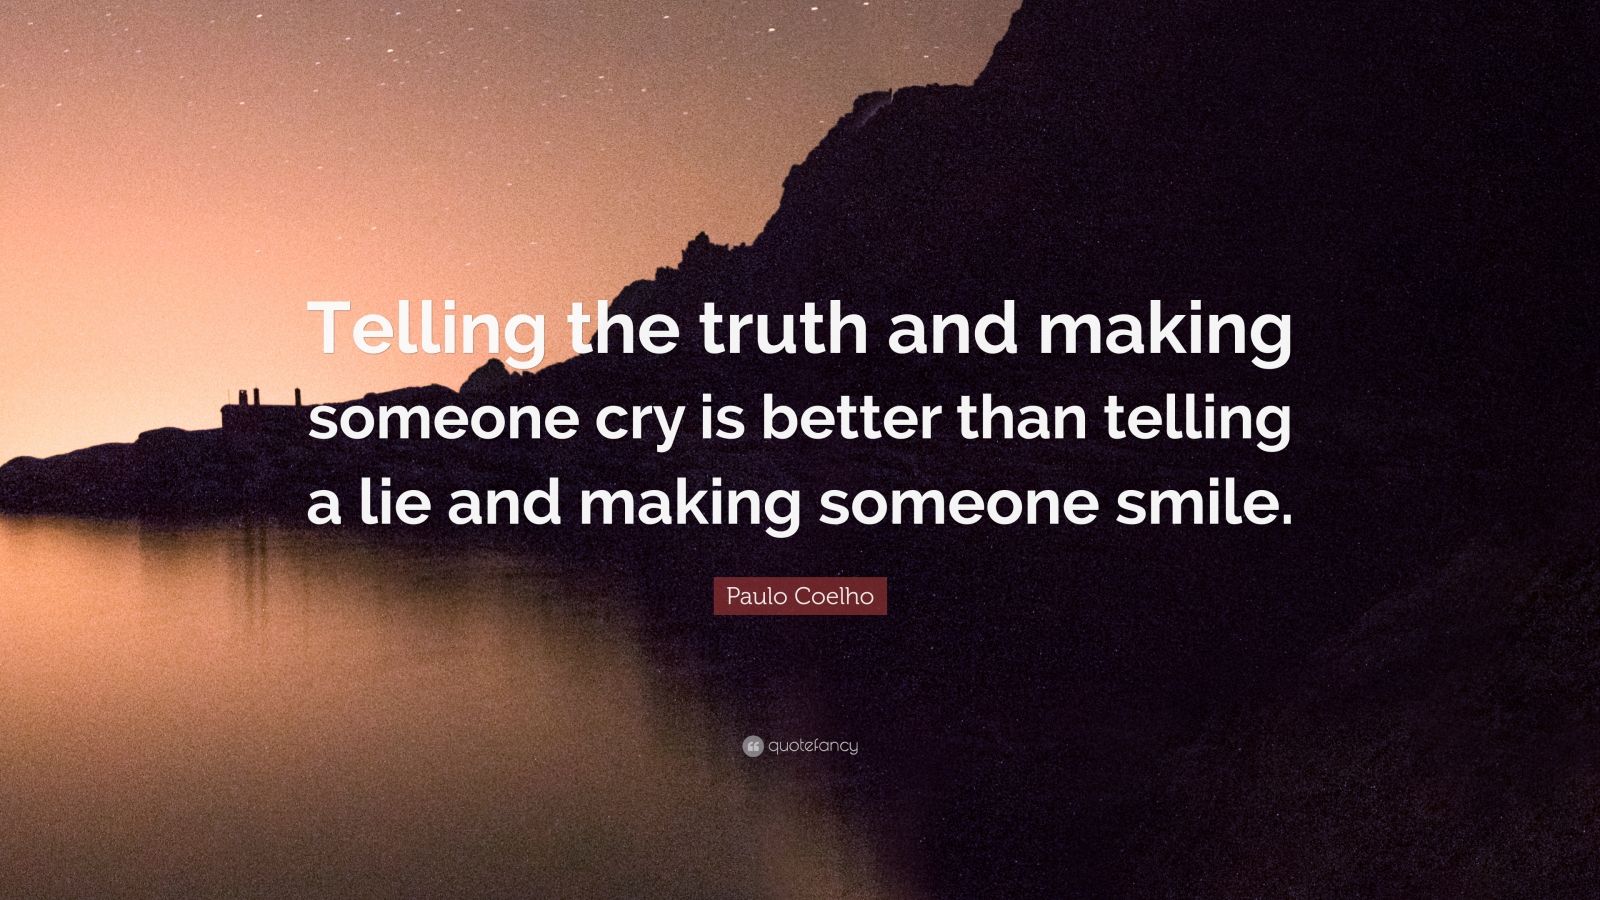 Paulo Coelho Quote: “Telling the truth and making someone cry is better